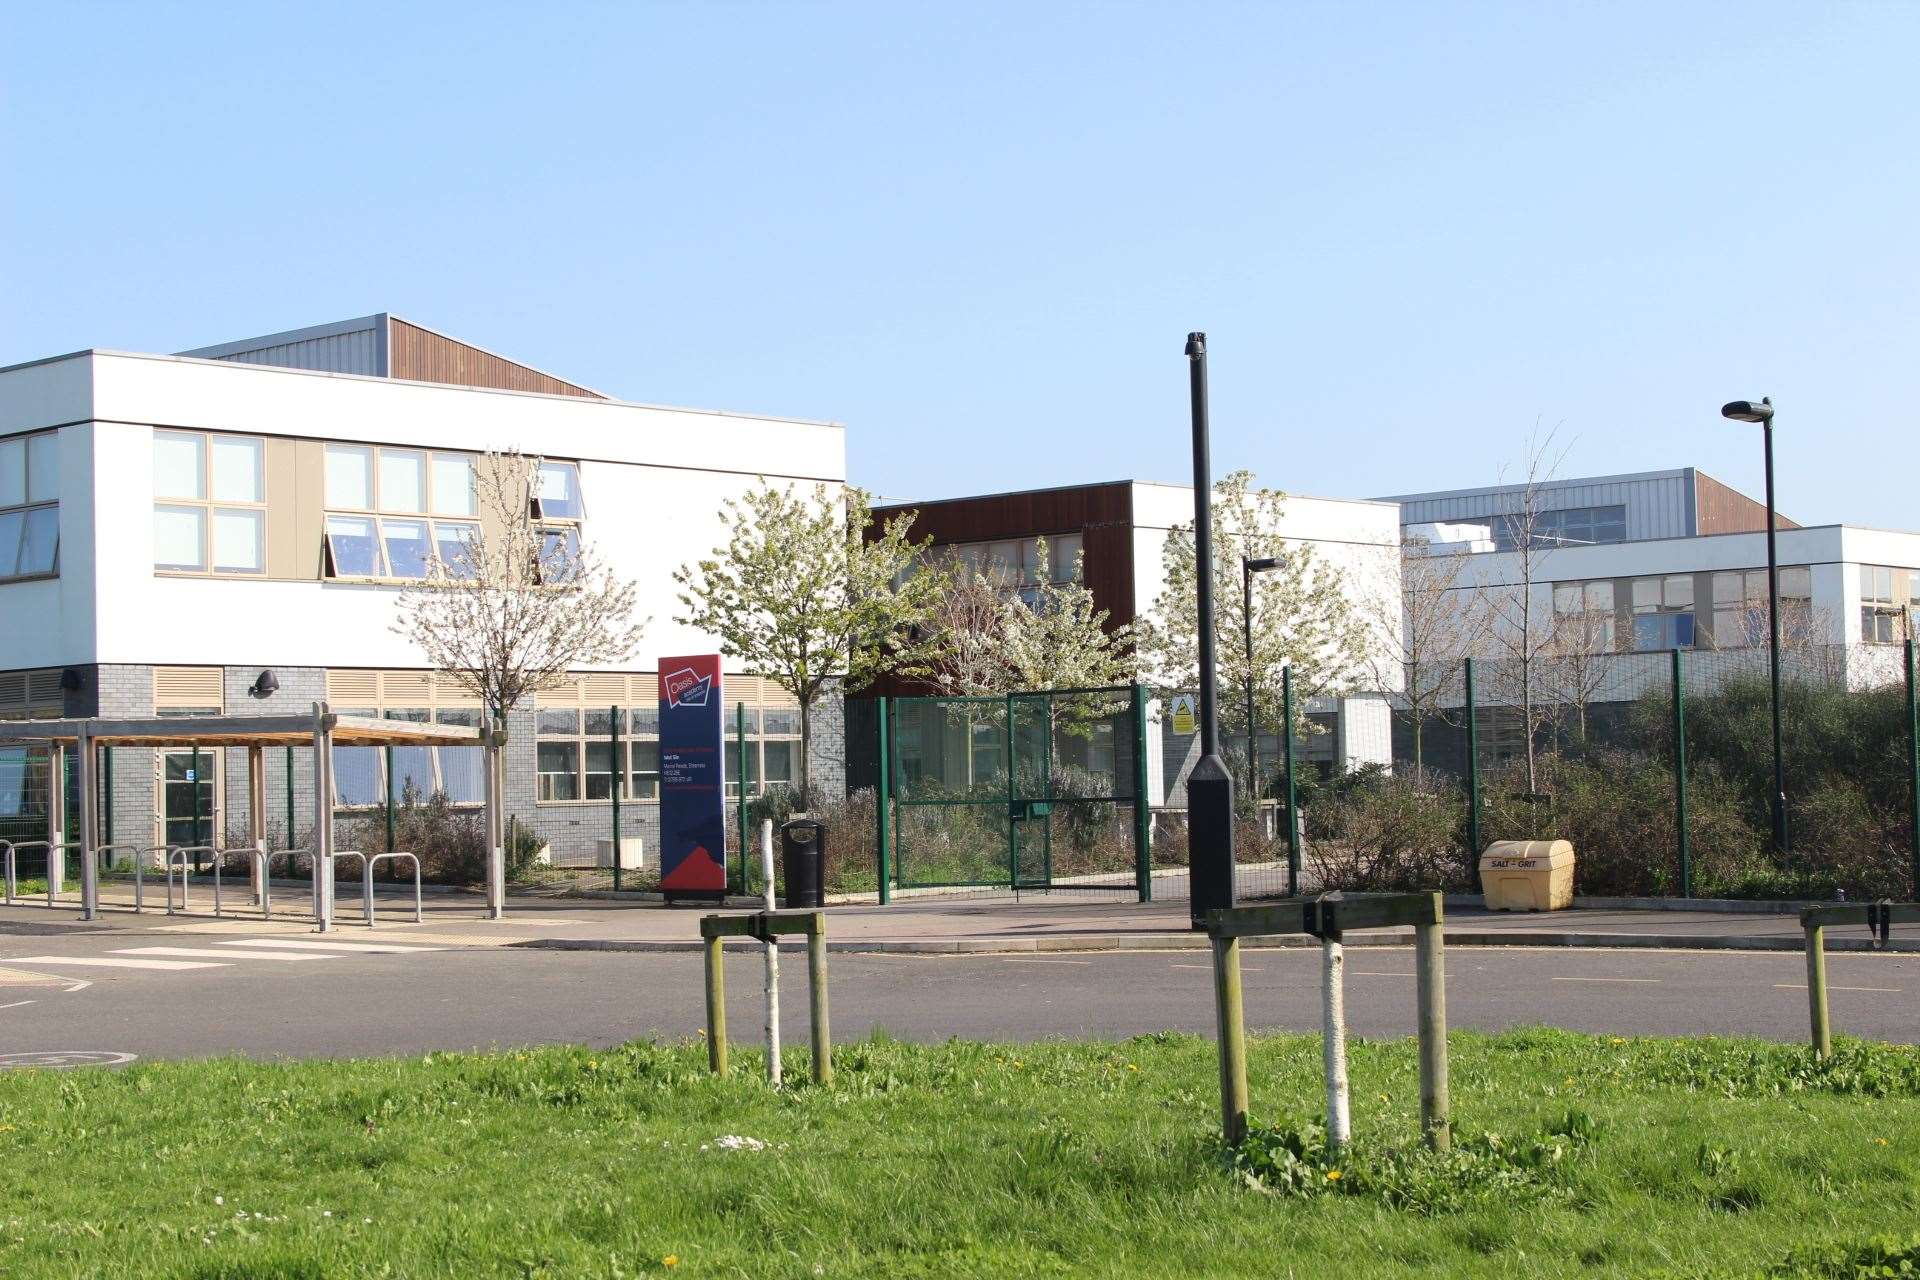 Oasis Academy's Sheerness campus in Marine Parade